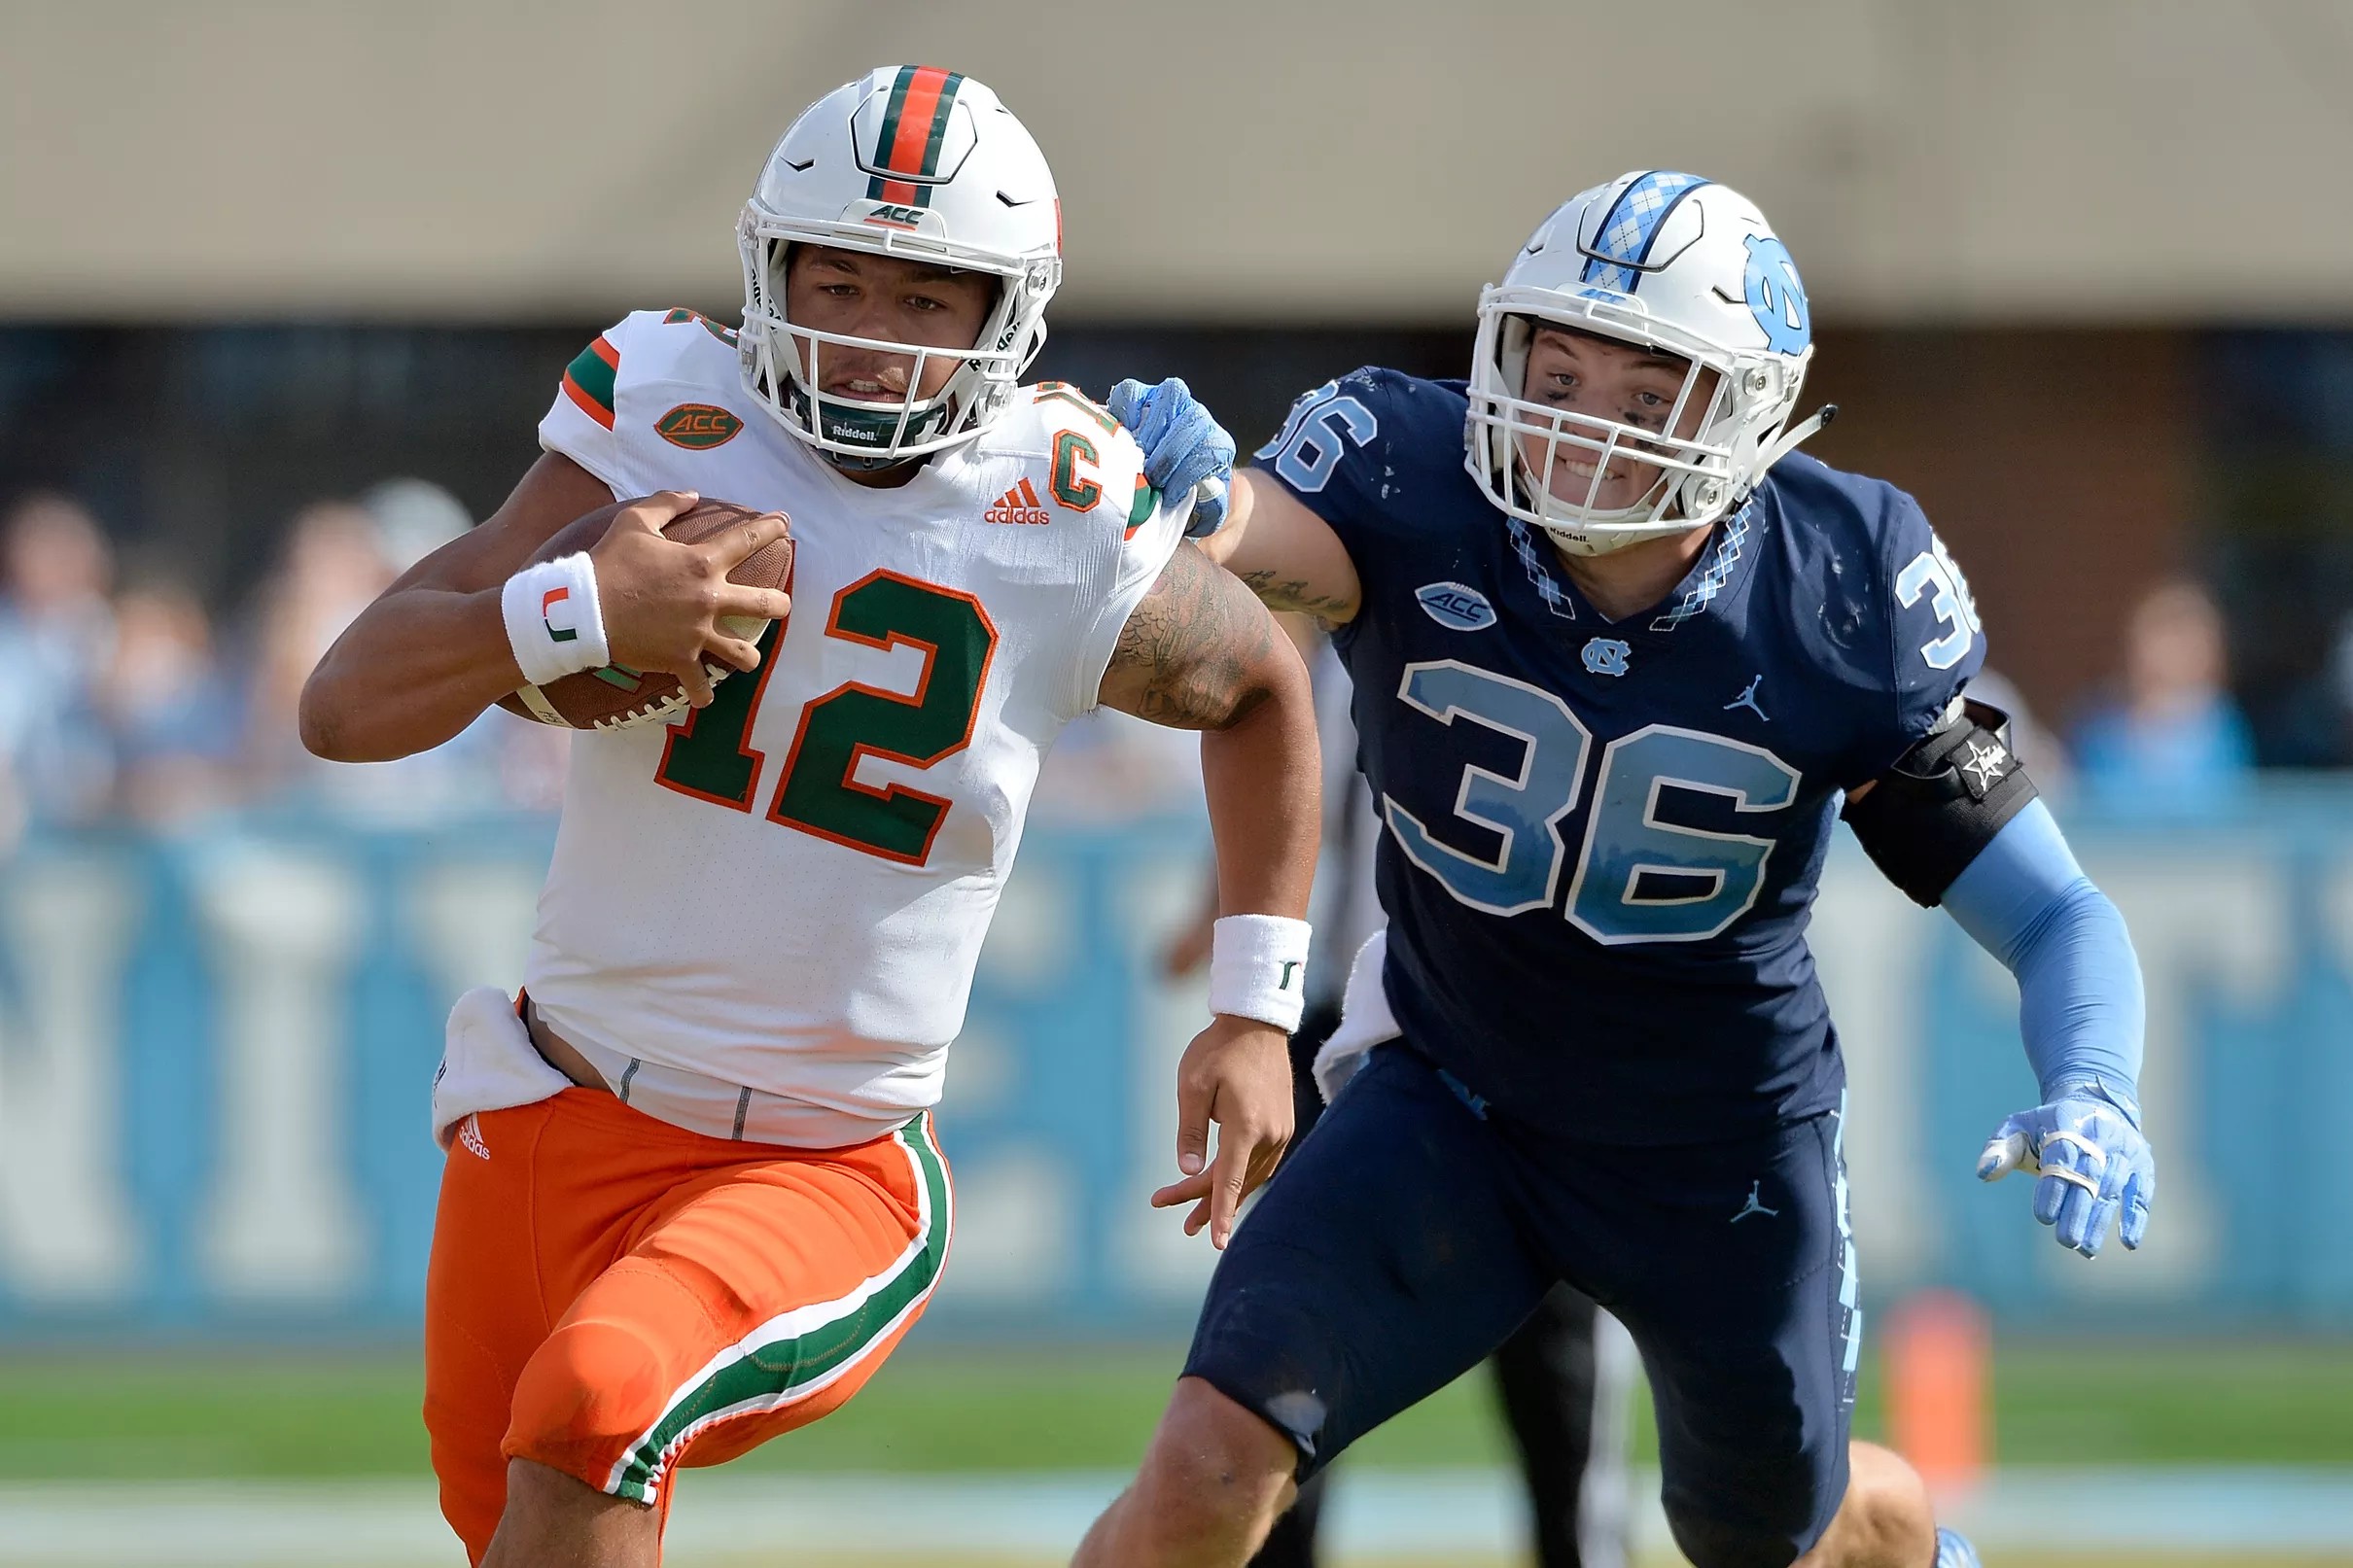 2018 Canes Football Preview: Week 5 vs UNC